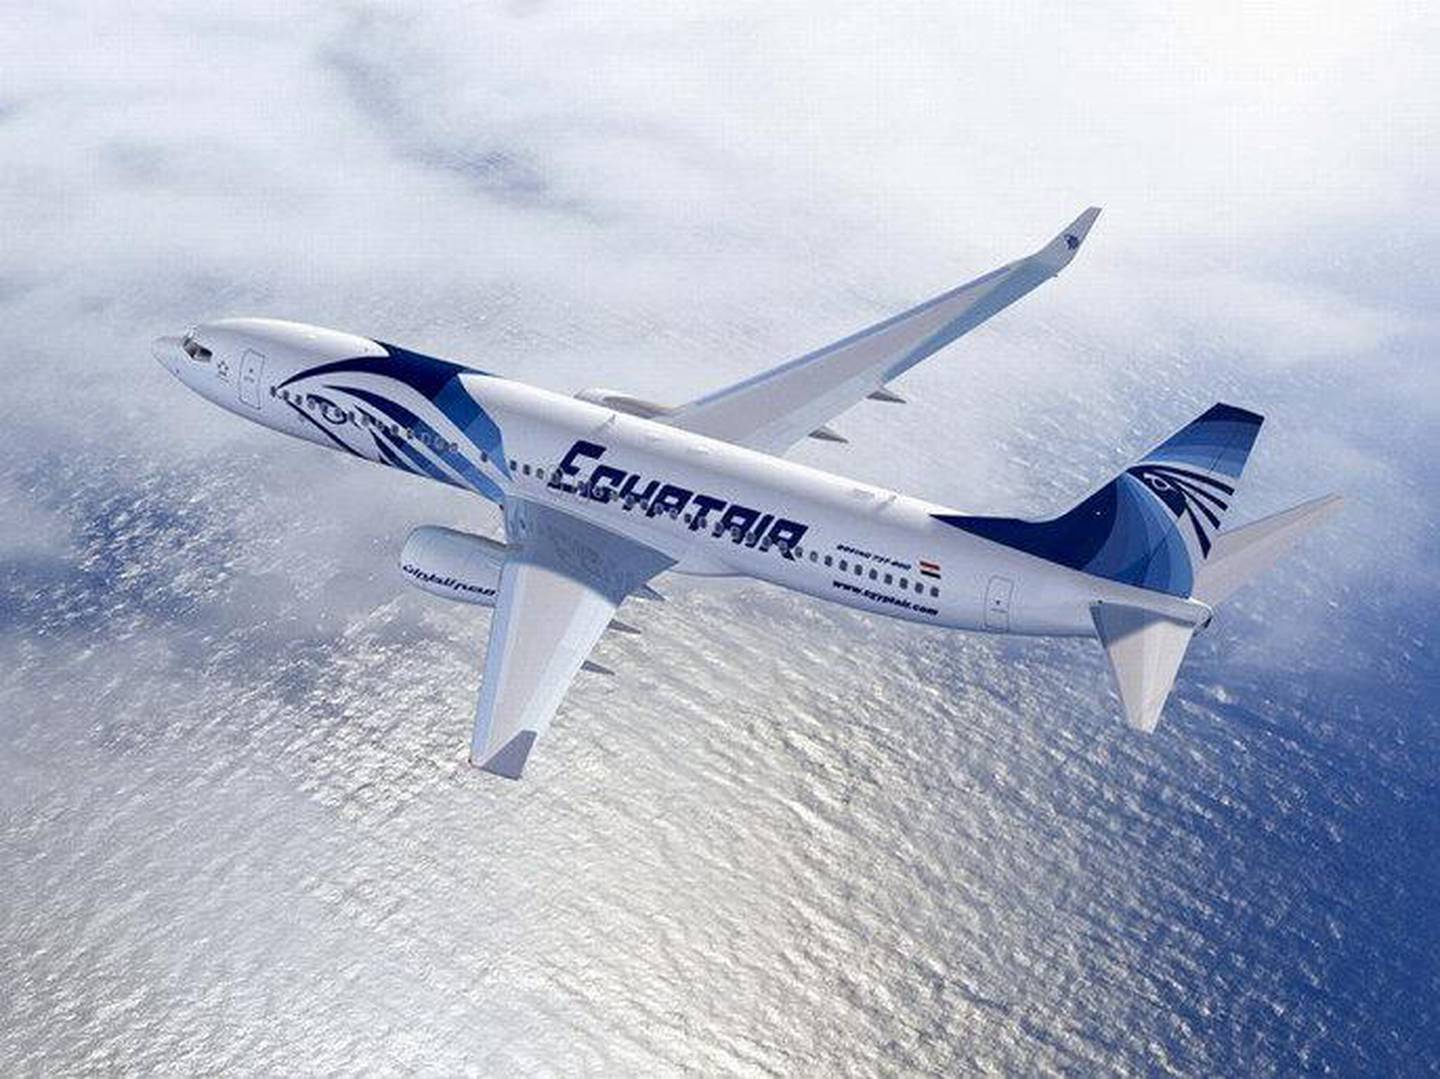 EgyptAir was the first airline in the Middle East. Courtesy EgyptAir